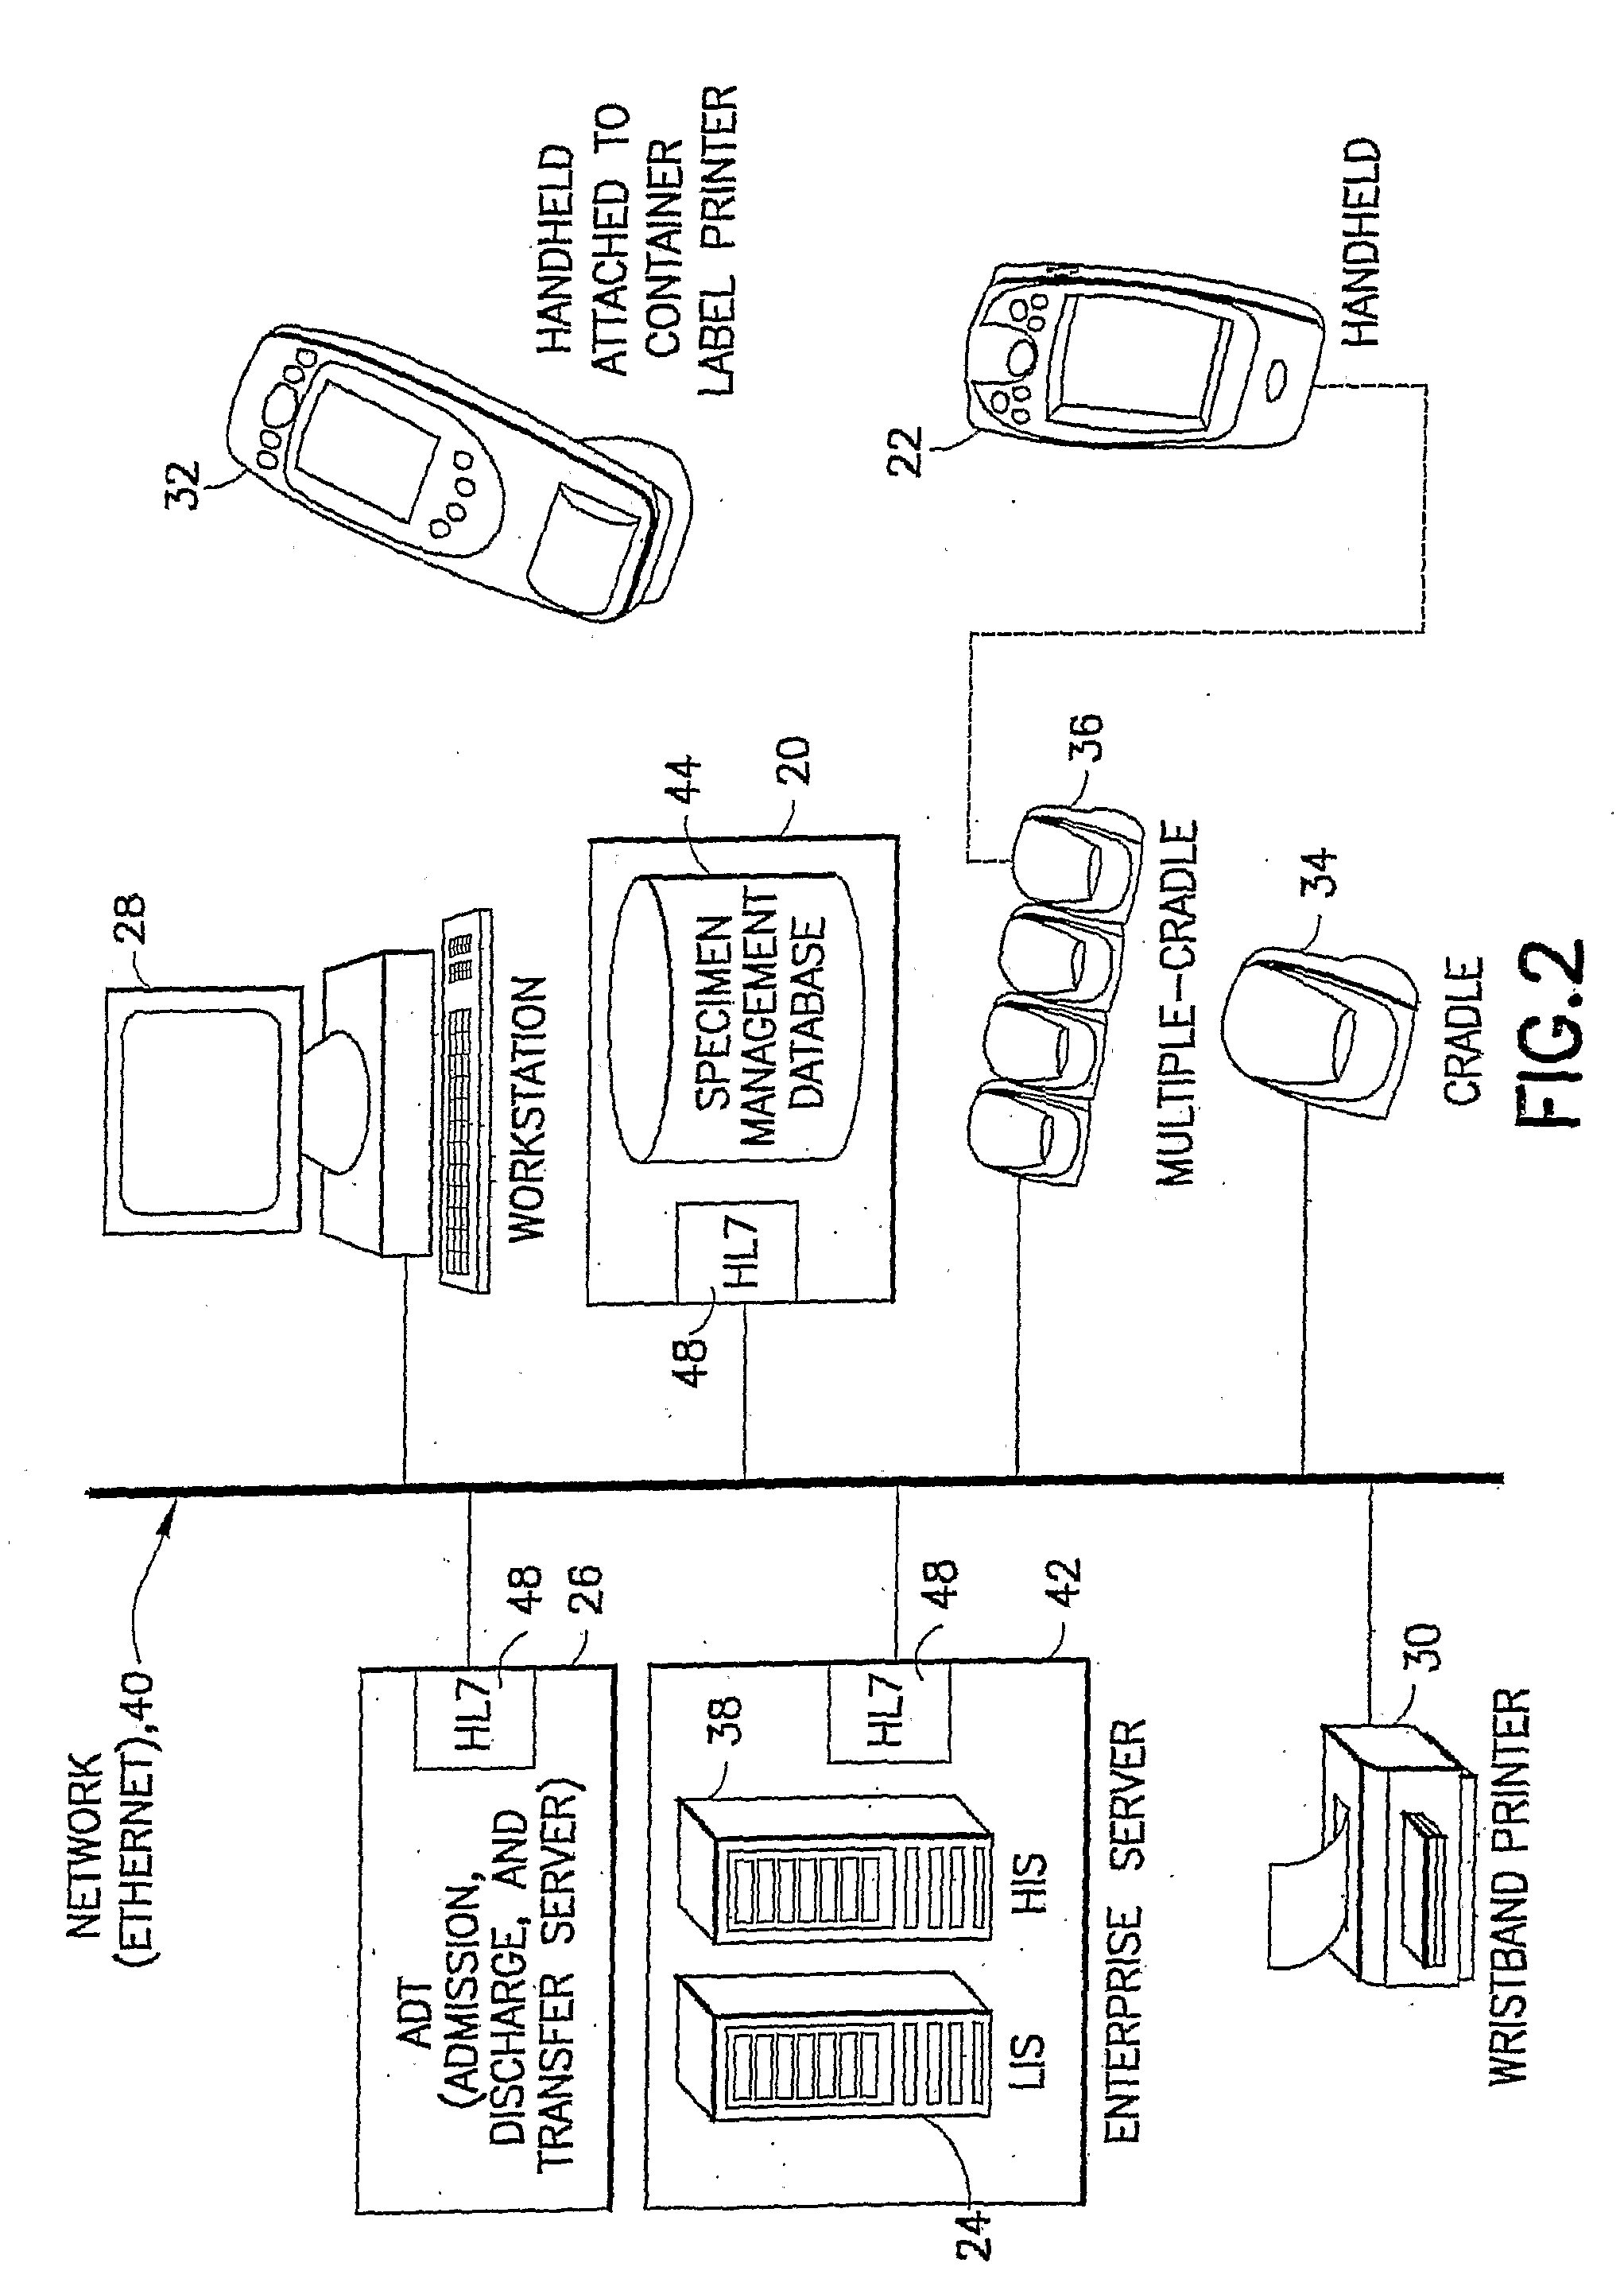 System and Apparatus for Medical Error Monitoring